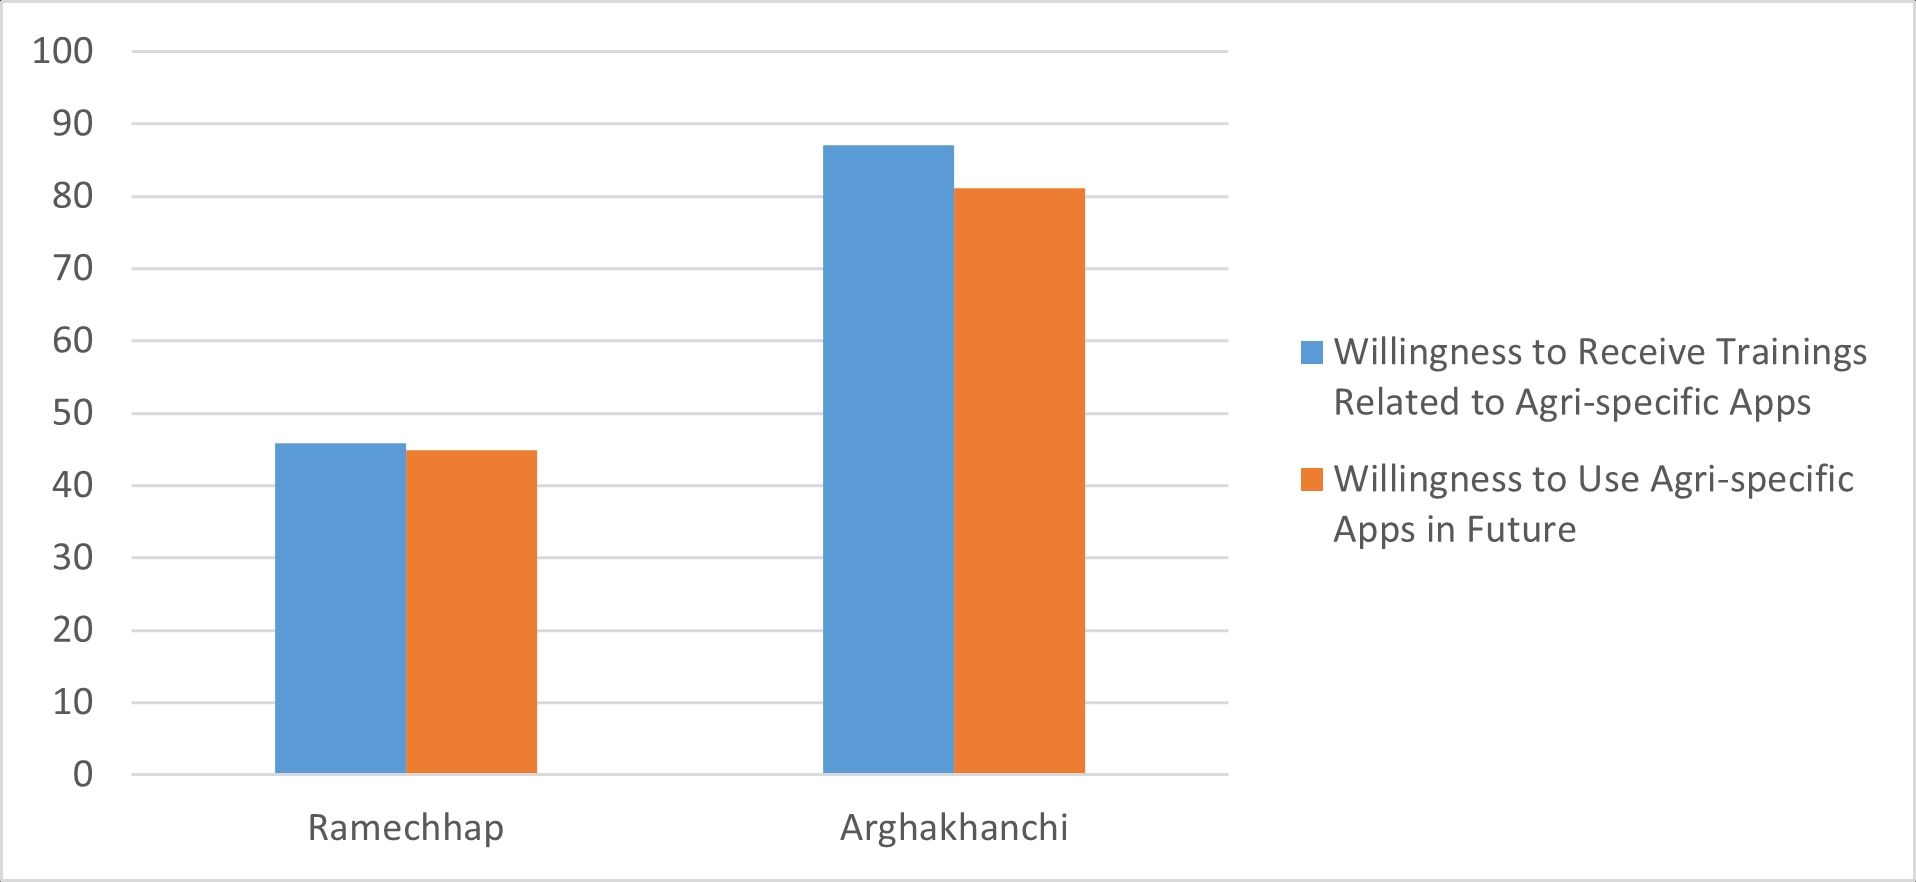 Interest in Training and Future Use of Agri-specific Apps (data in percentage)